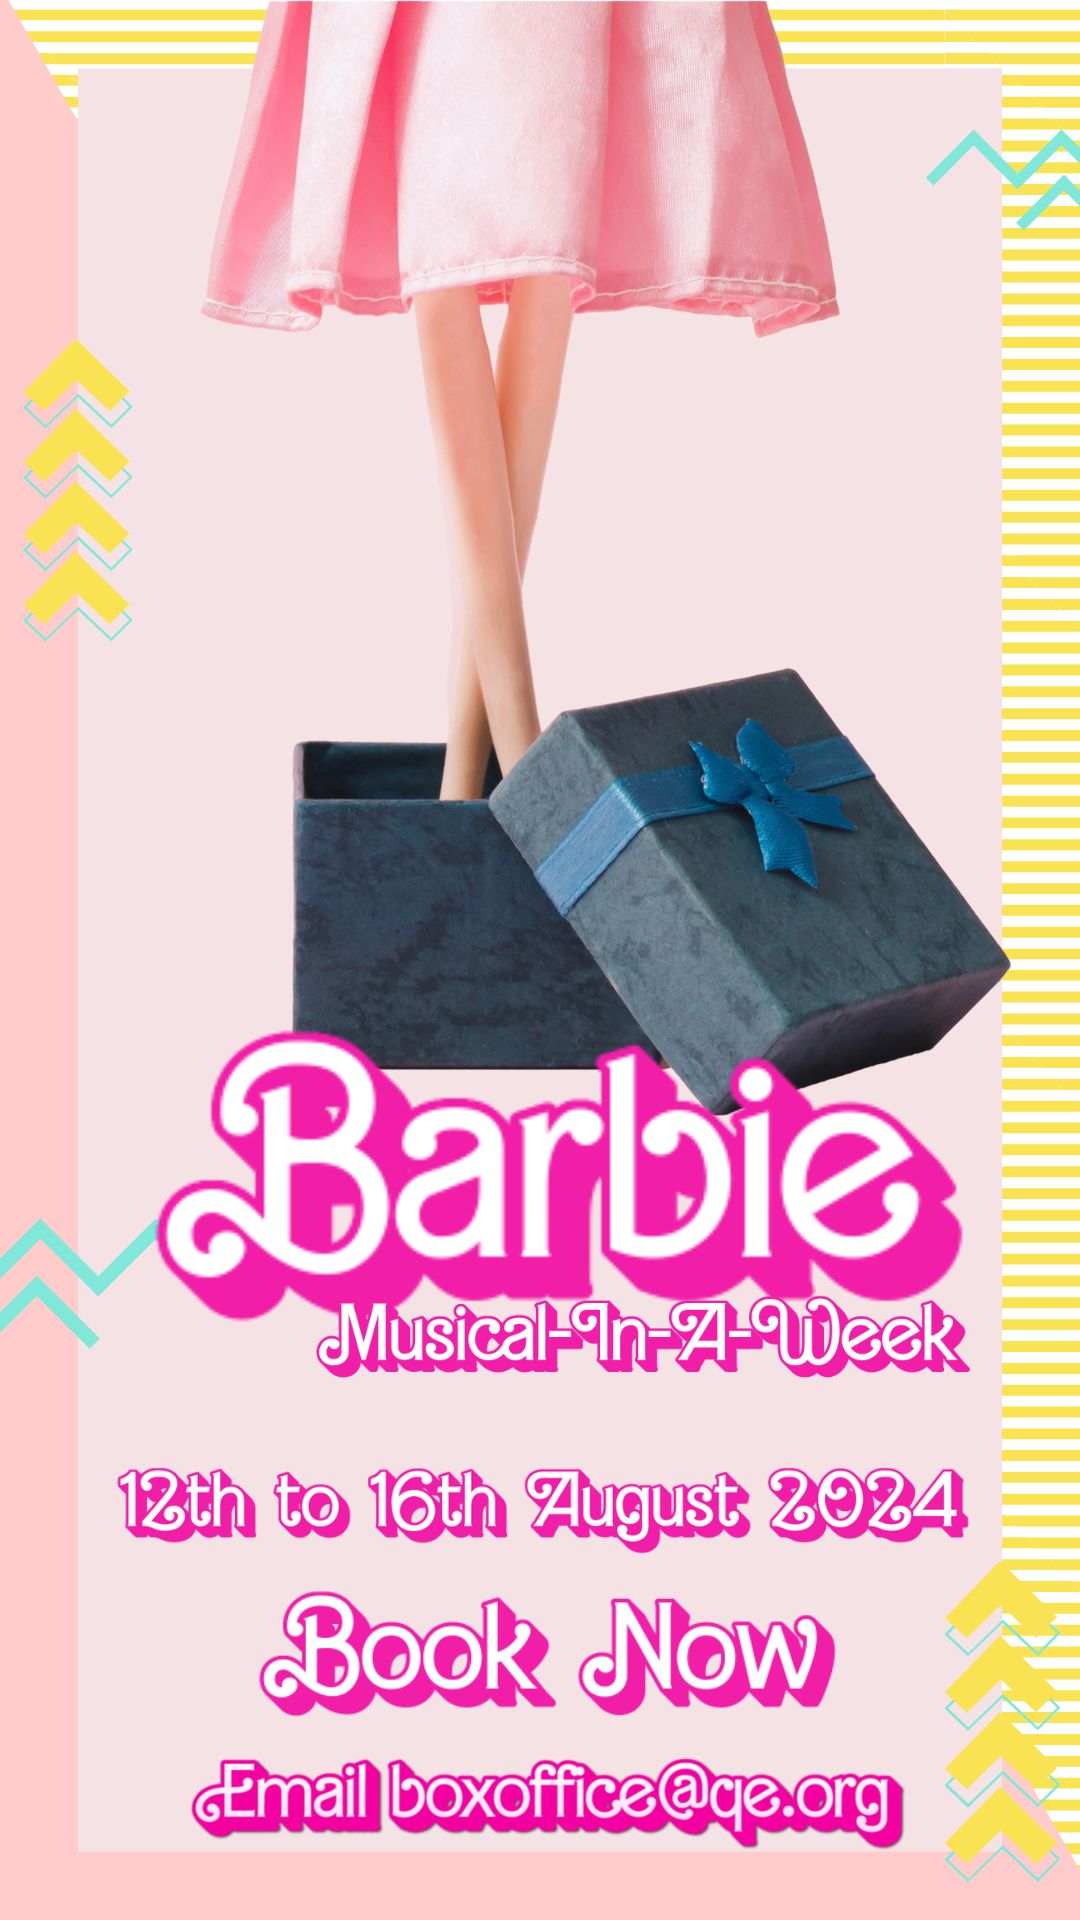 Learn Barbie the Musical in a week as one of QE's camps and courses.